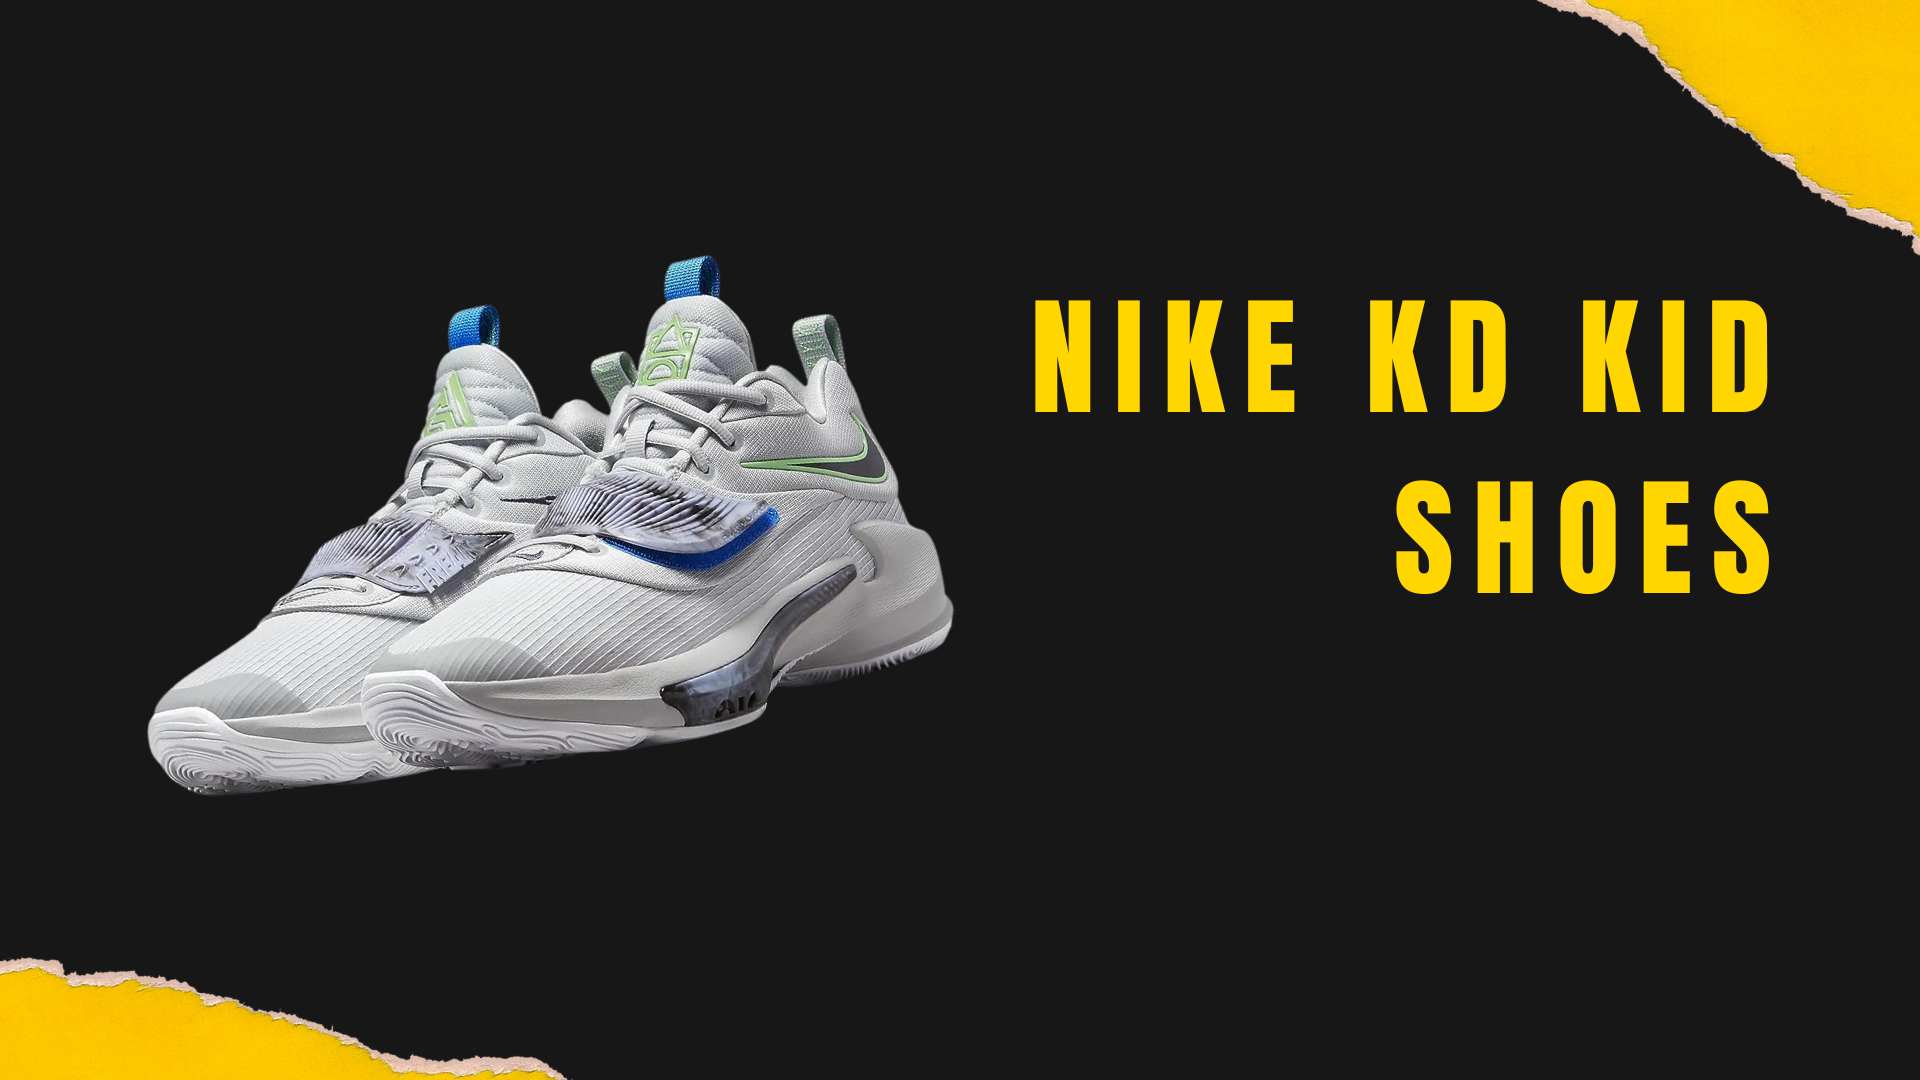 Nike Kd Kid Shoes: The Perfect Blend of Style and Comfort